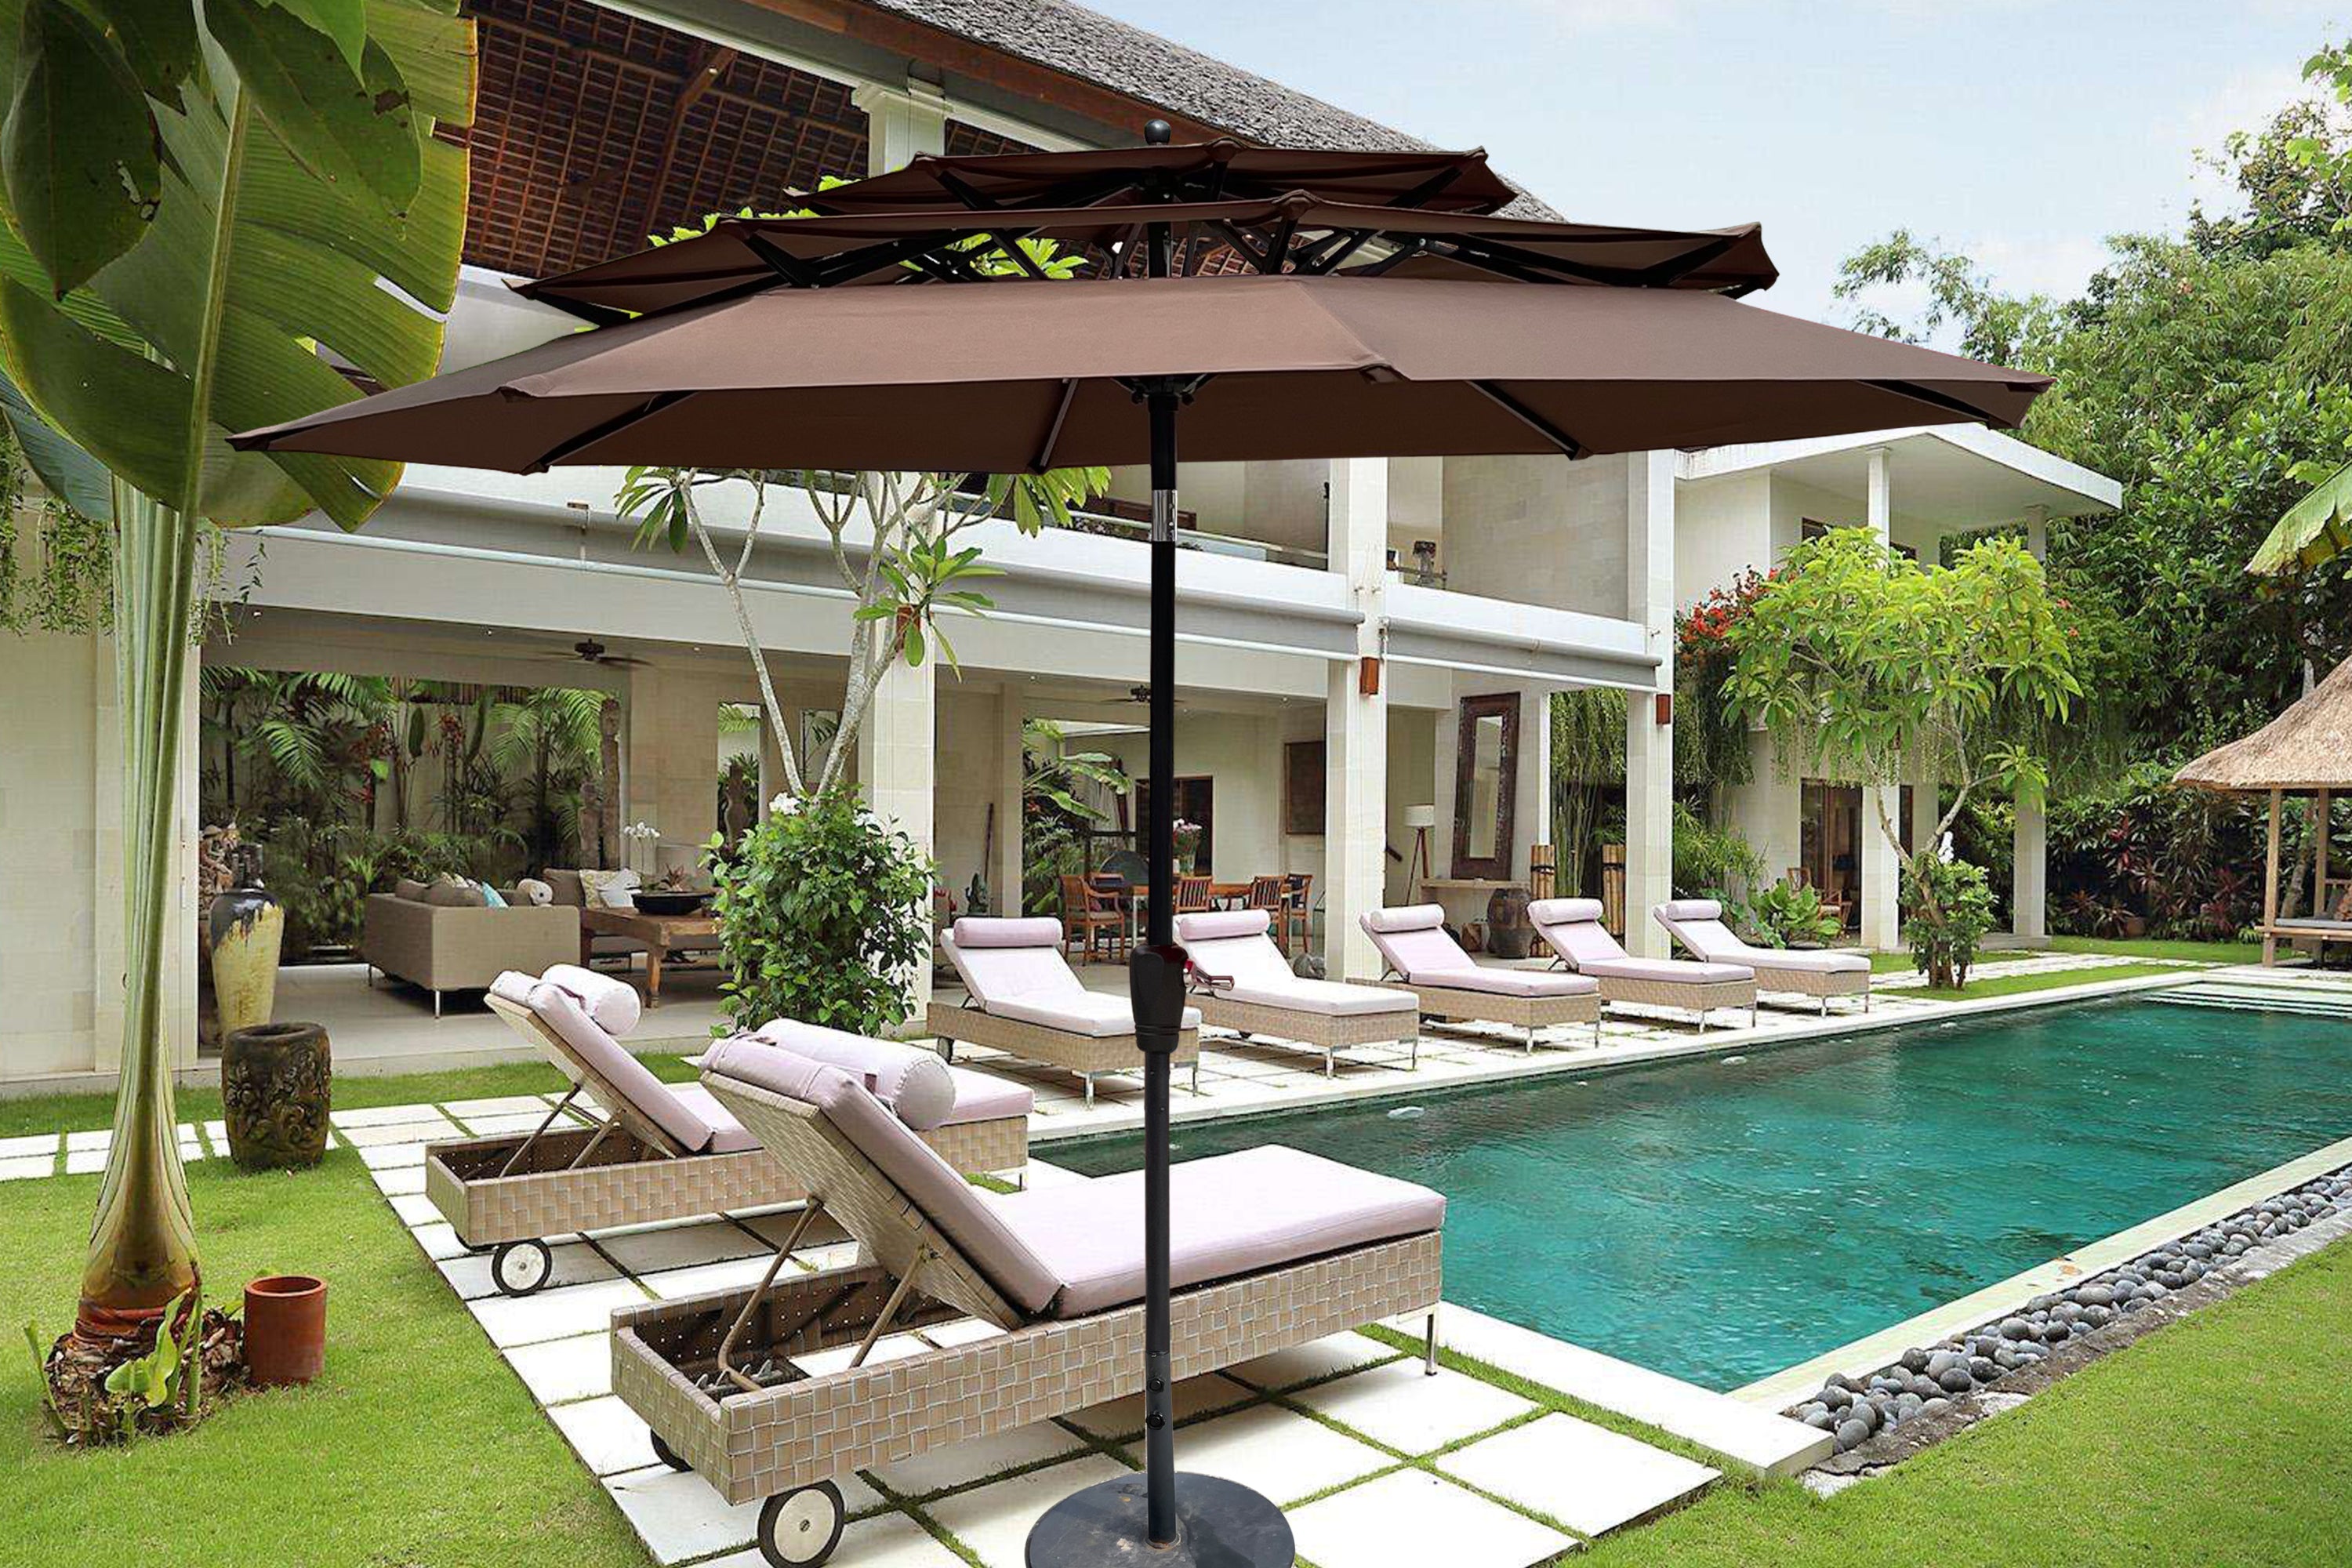 9Ft-3-Tiers-Outdoor-Patio--Umbrella-with-Crank-and-tilt-and-Wind-Vents-Furniture/outdoor/Umbrellas-&-Sunshades